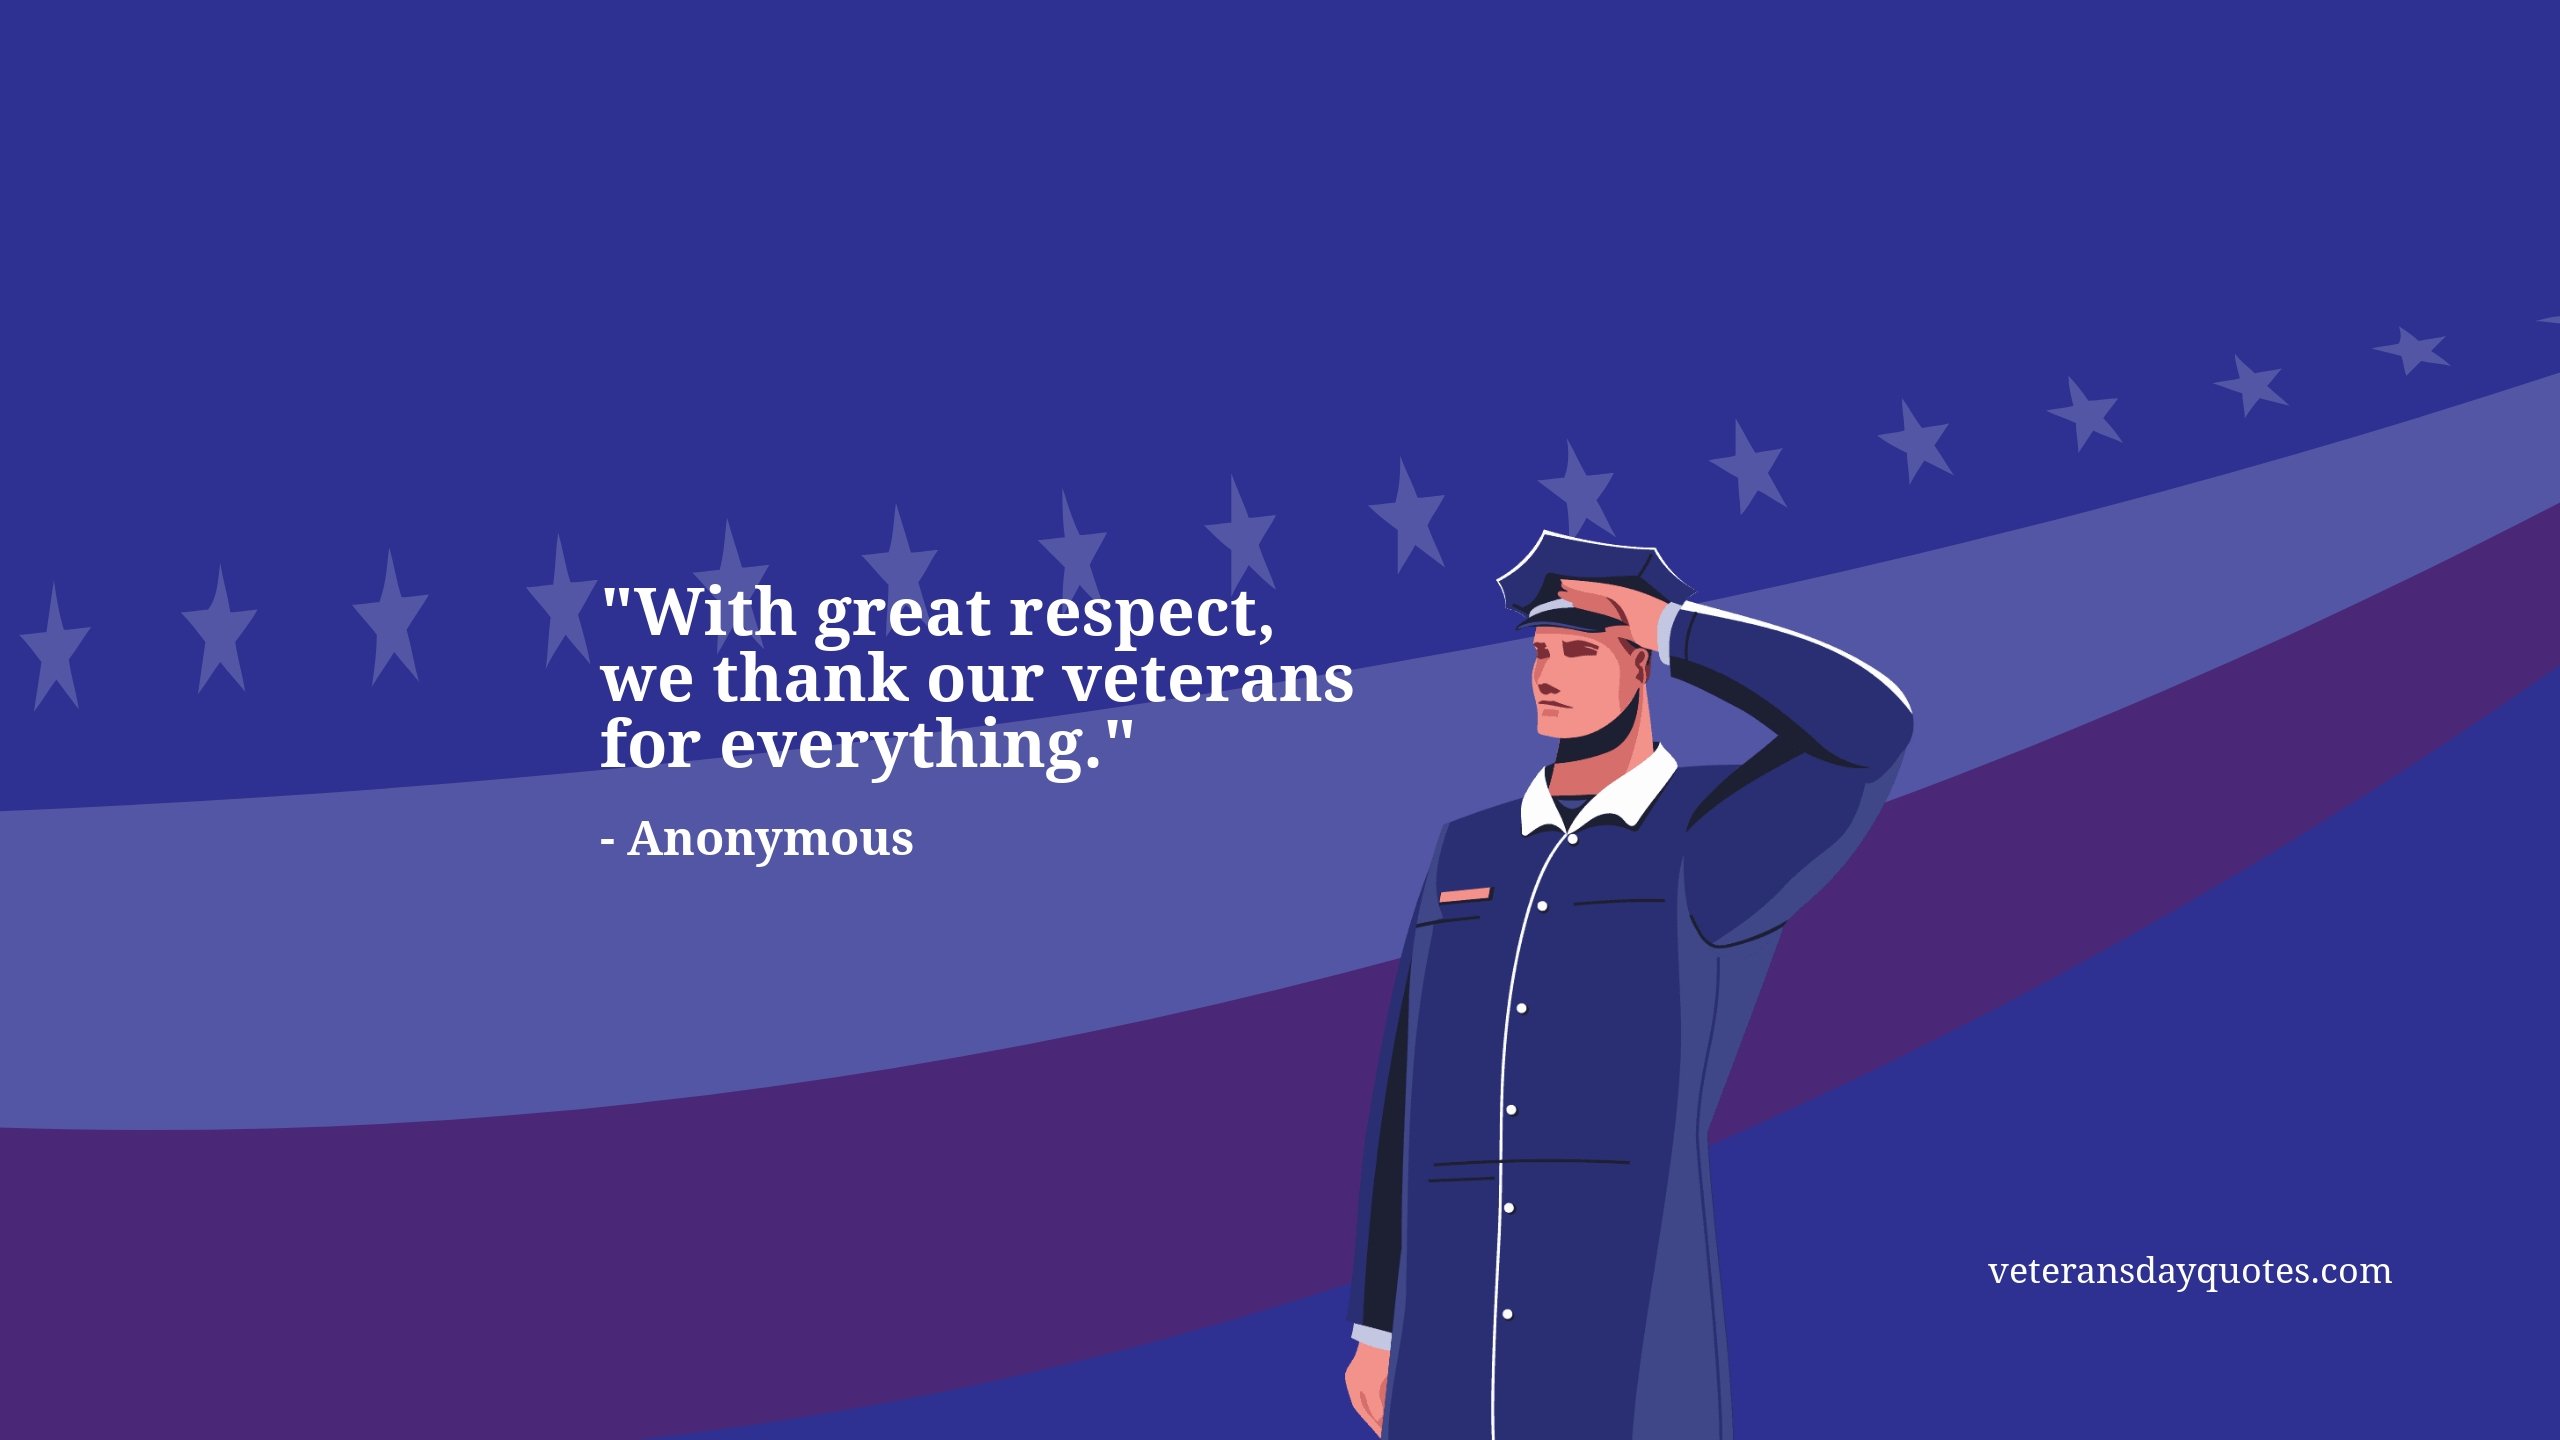 free-veterans-day-quote-image-download-in-illustrator-photoshop-eps